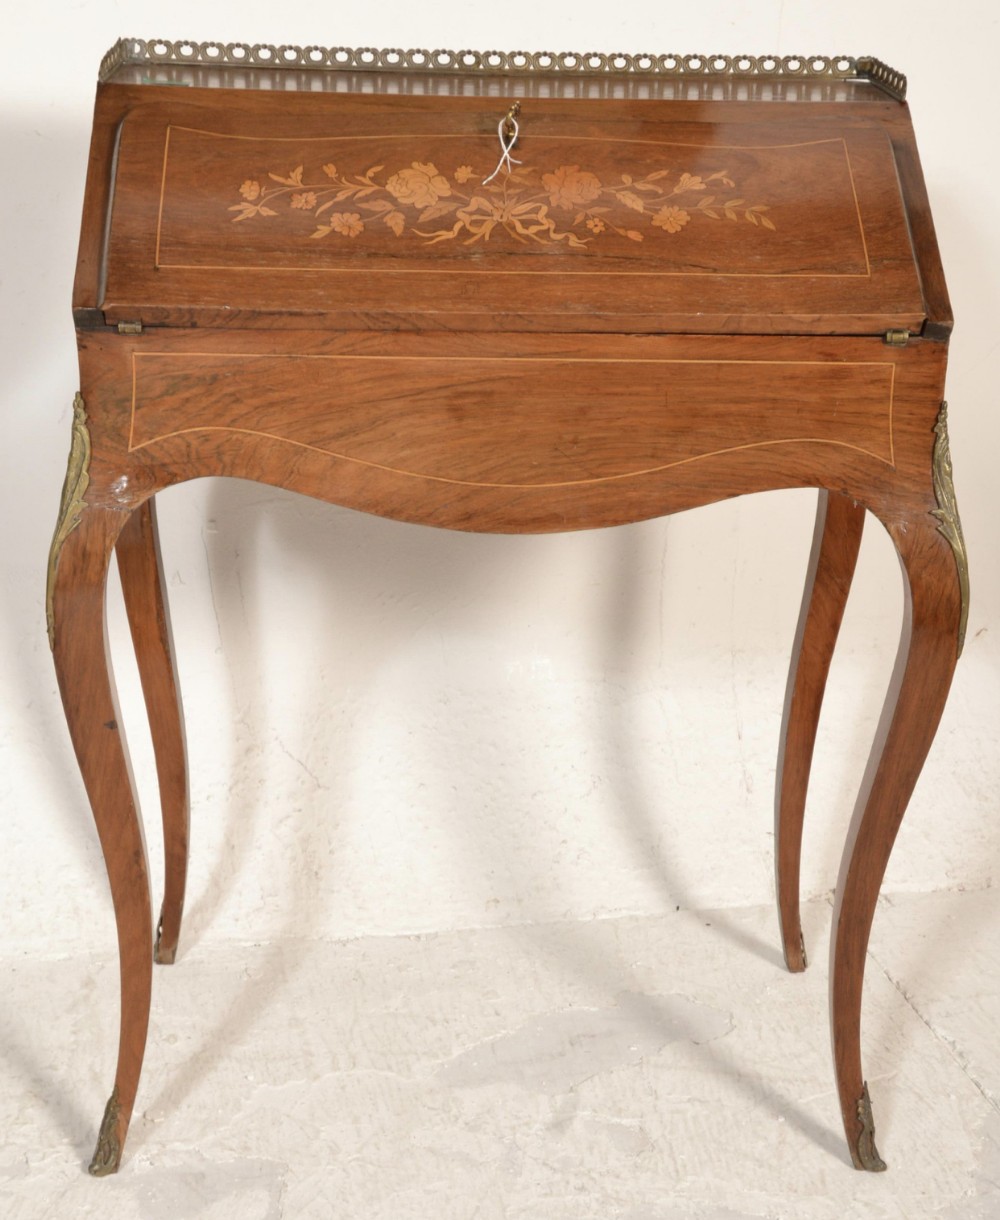 c19th bureau de dame in king wood and inlaid